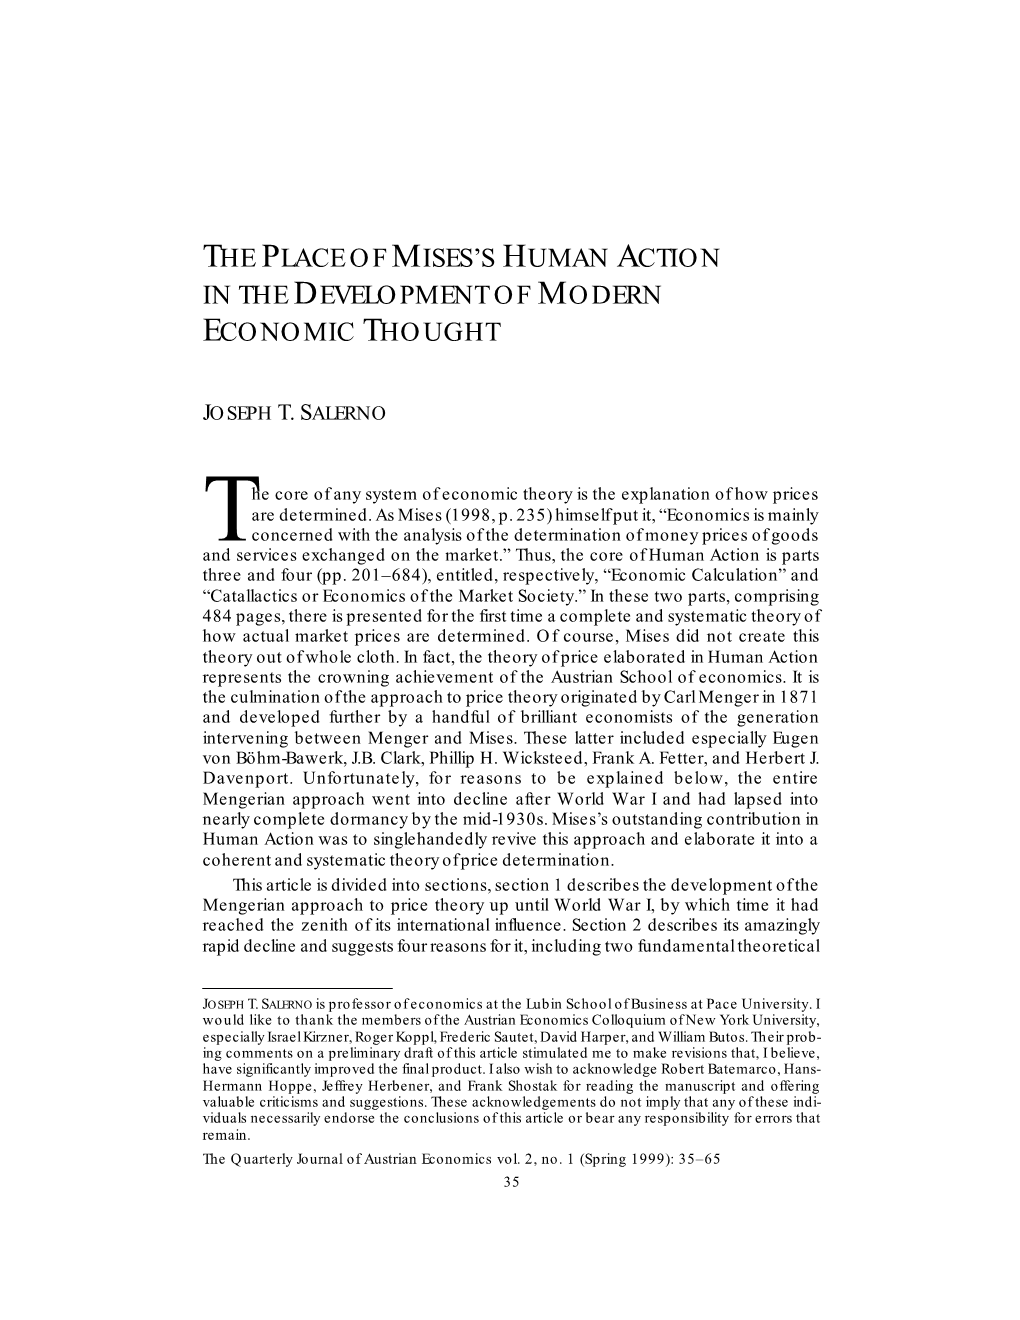 The Place of Mises's Human Action in the Development of Modern